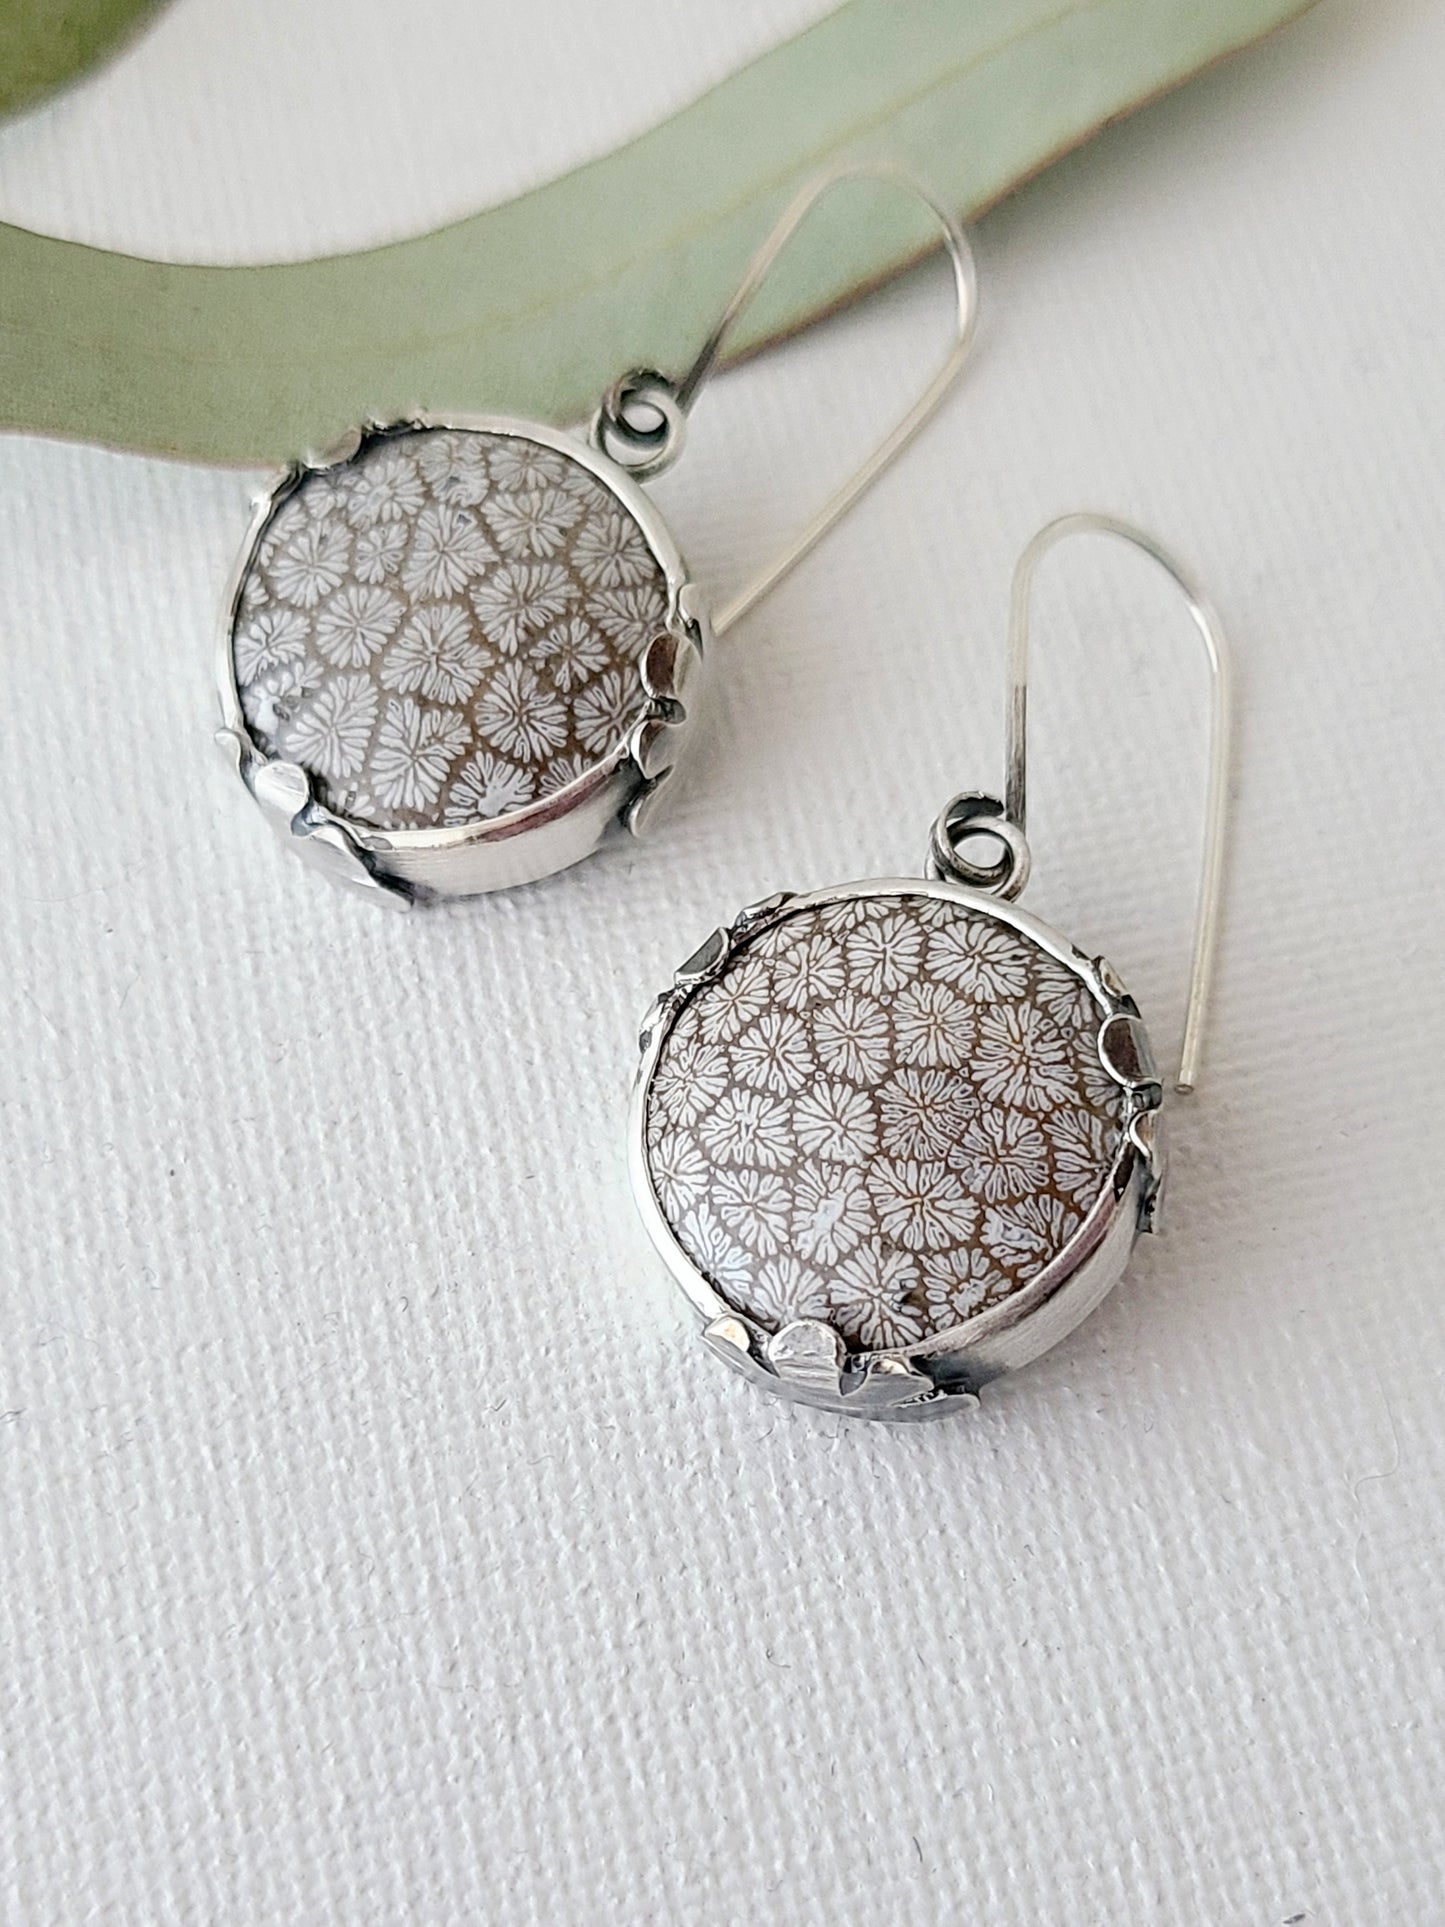 Fossil Flower earrings-Black & White Round Fossilized Coral